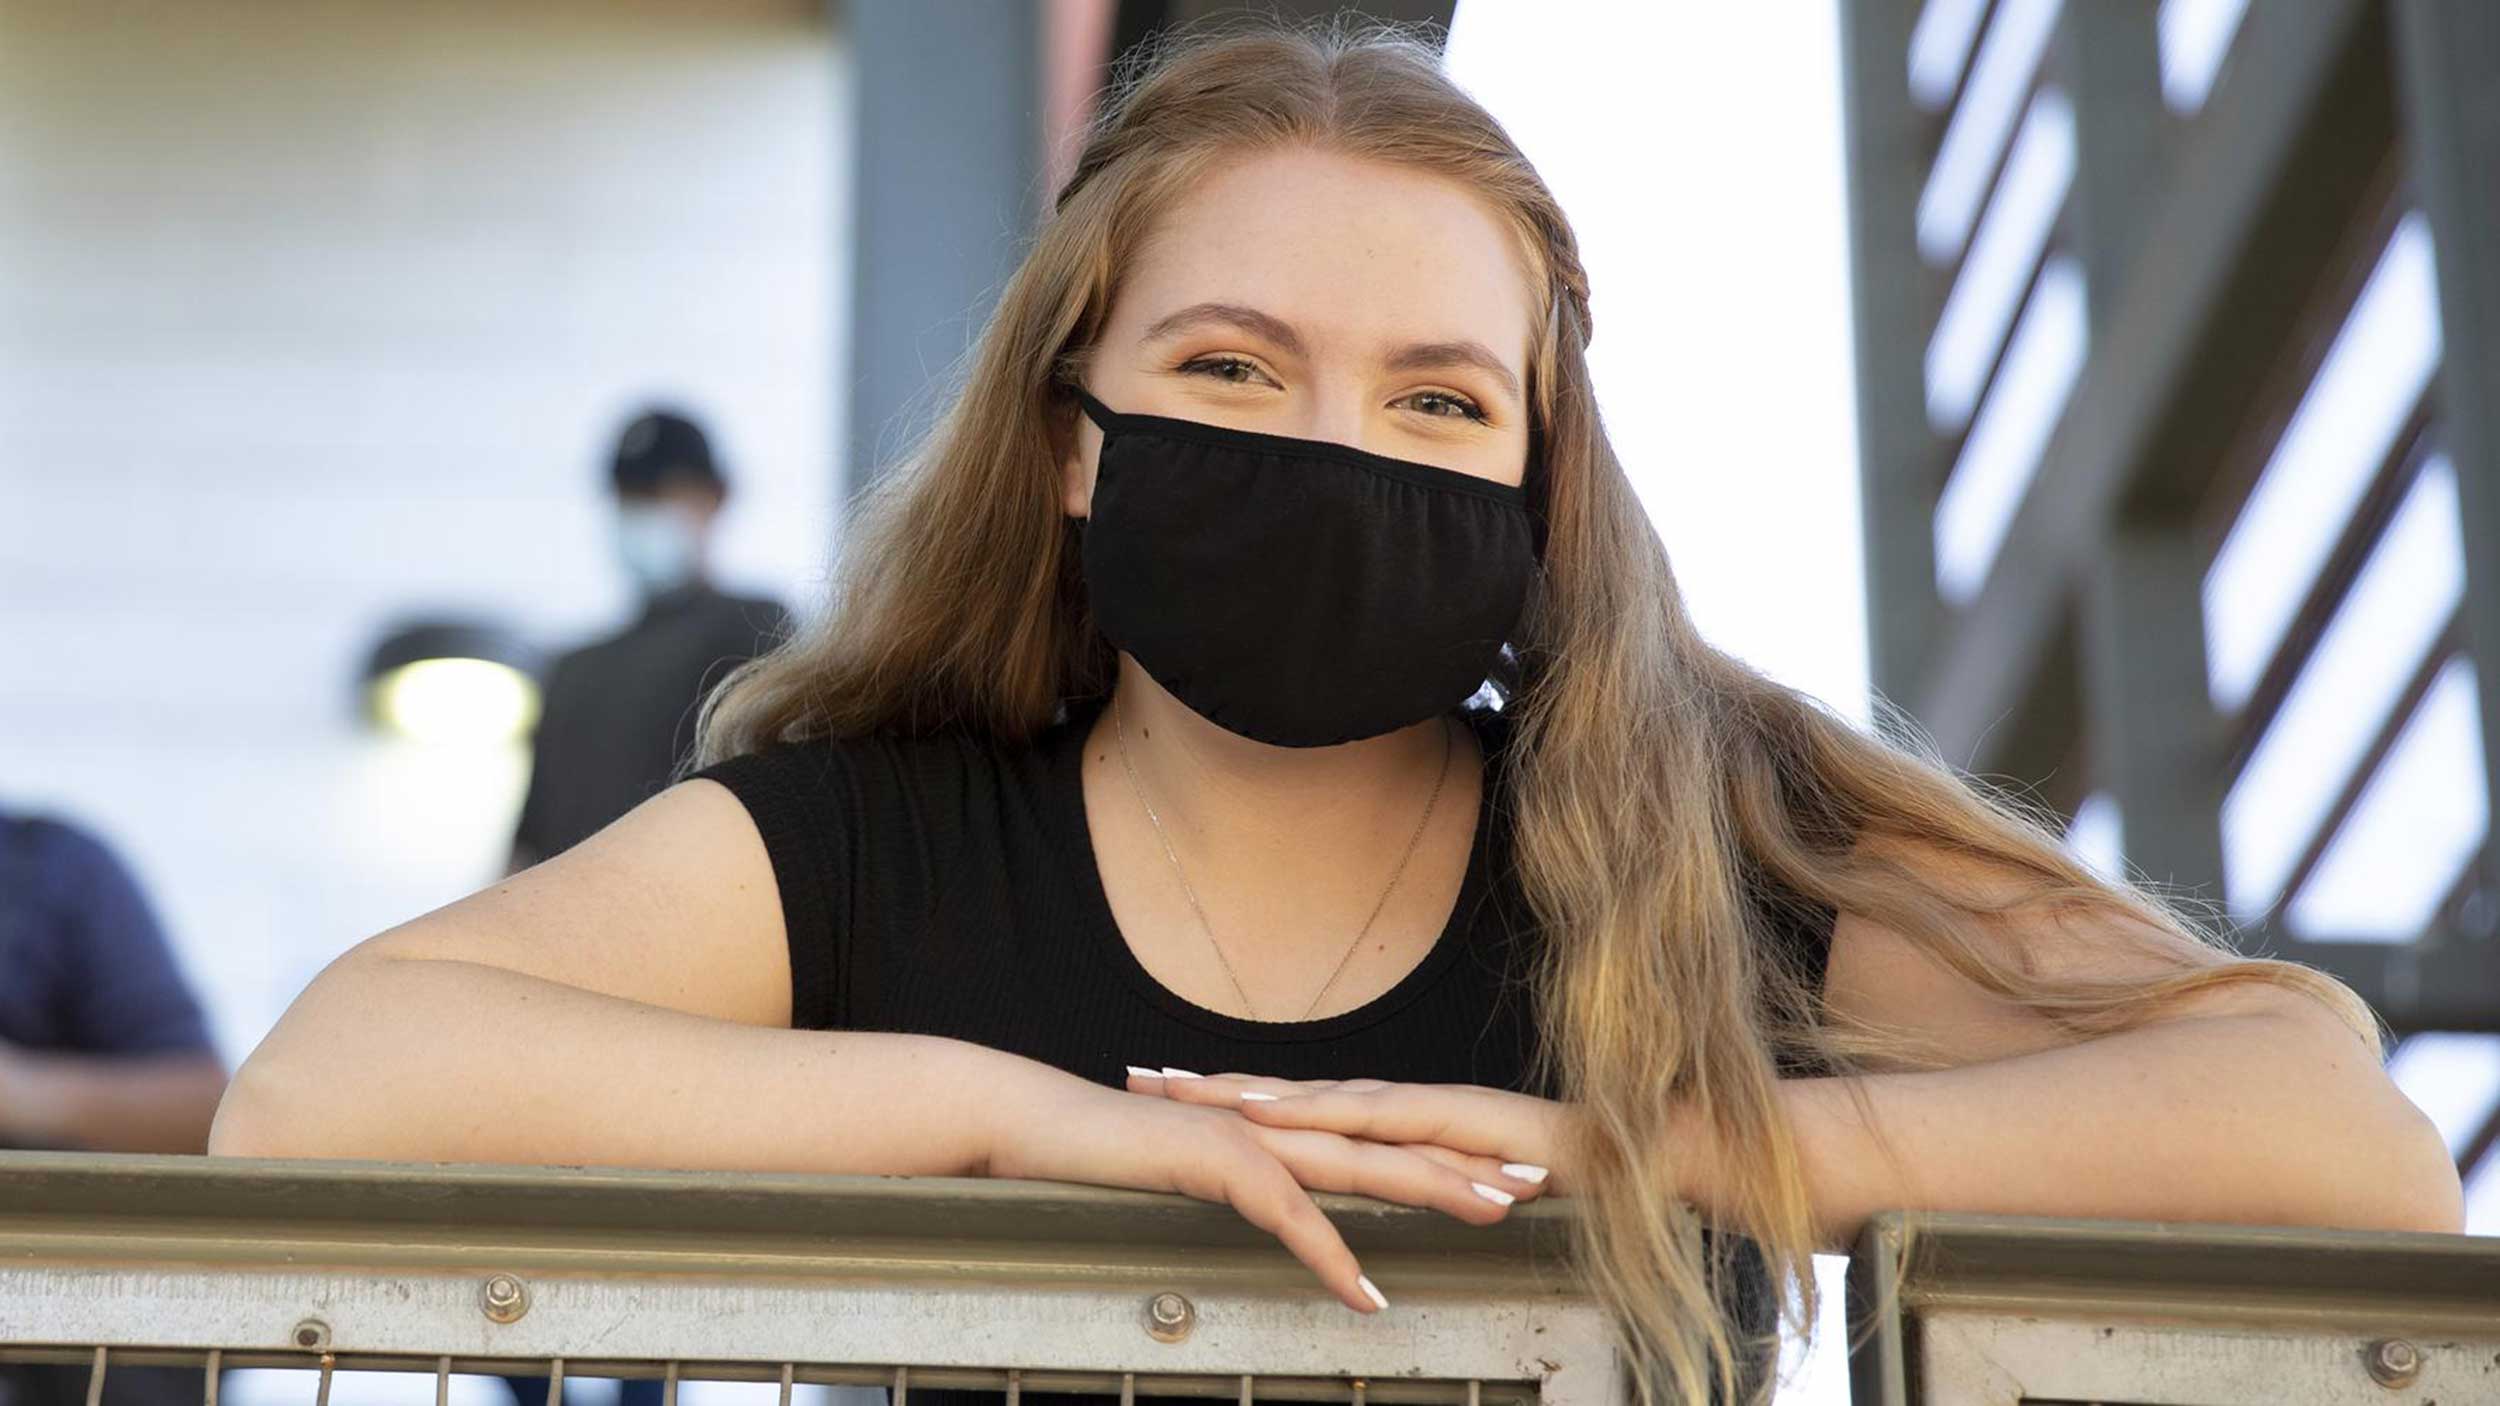 An ASU student smiles for the camera wearing a black face mask